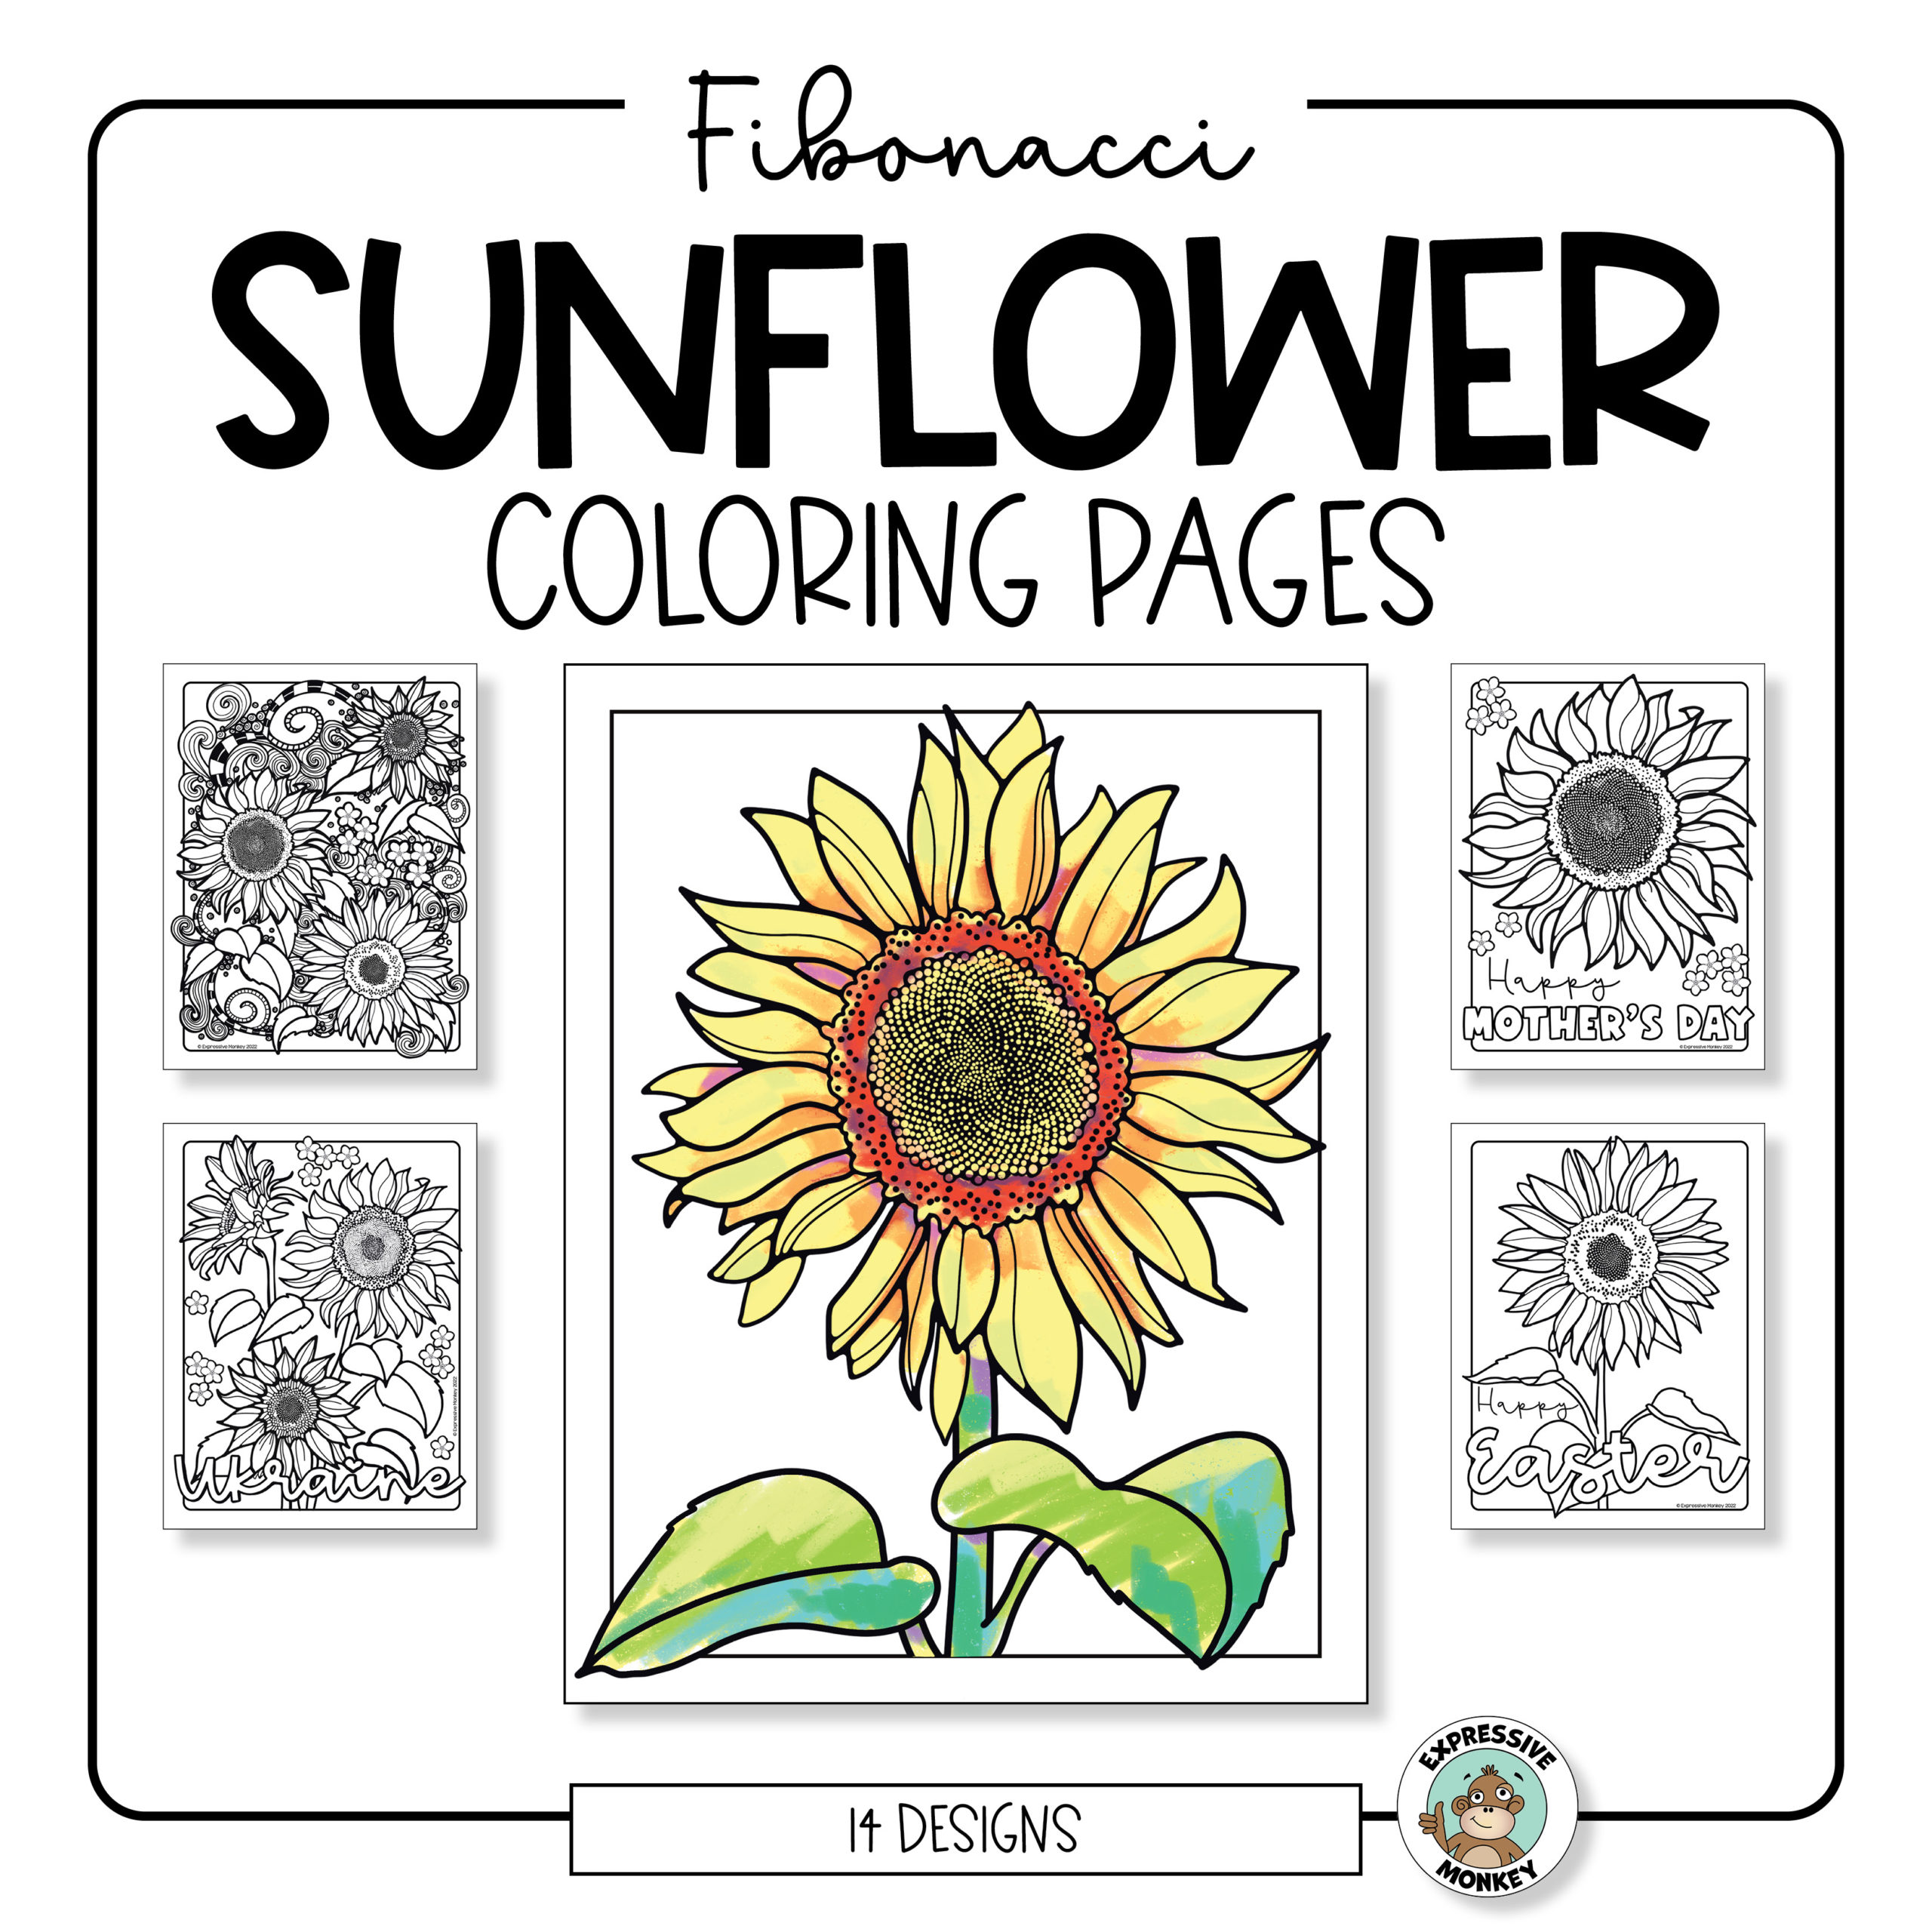 Sunflower coloring pages with fibonacci spirals